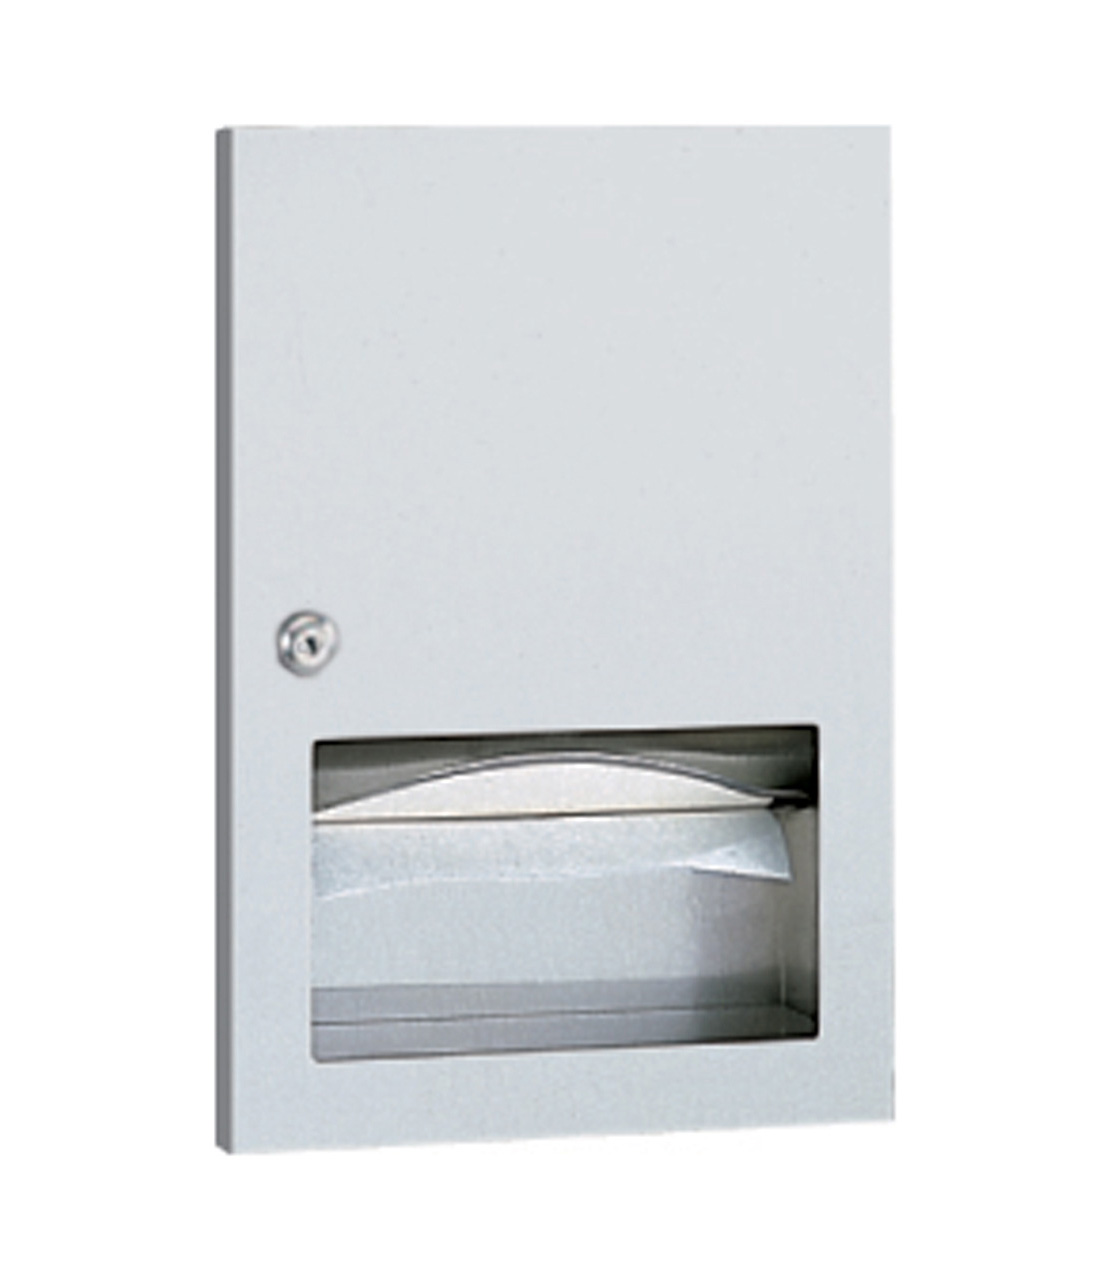 Coverall Recessed Towel Dispenser - (Model #: td-6)-image